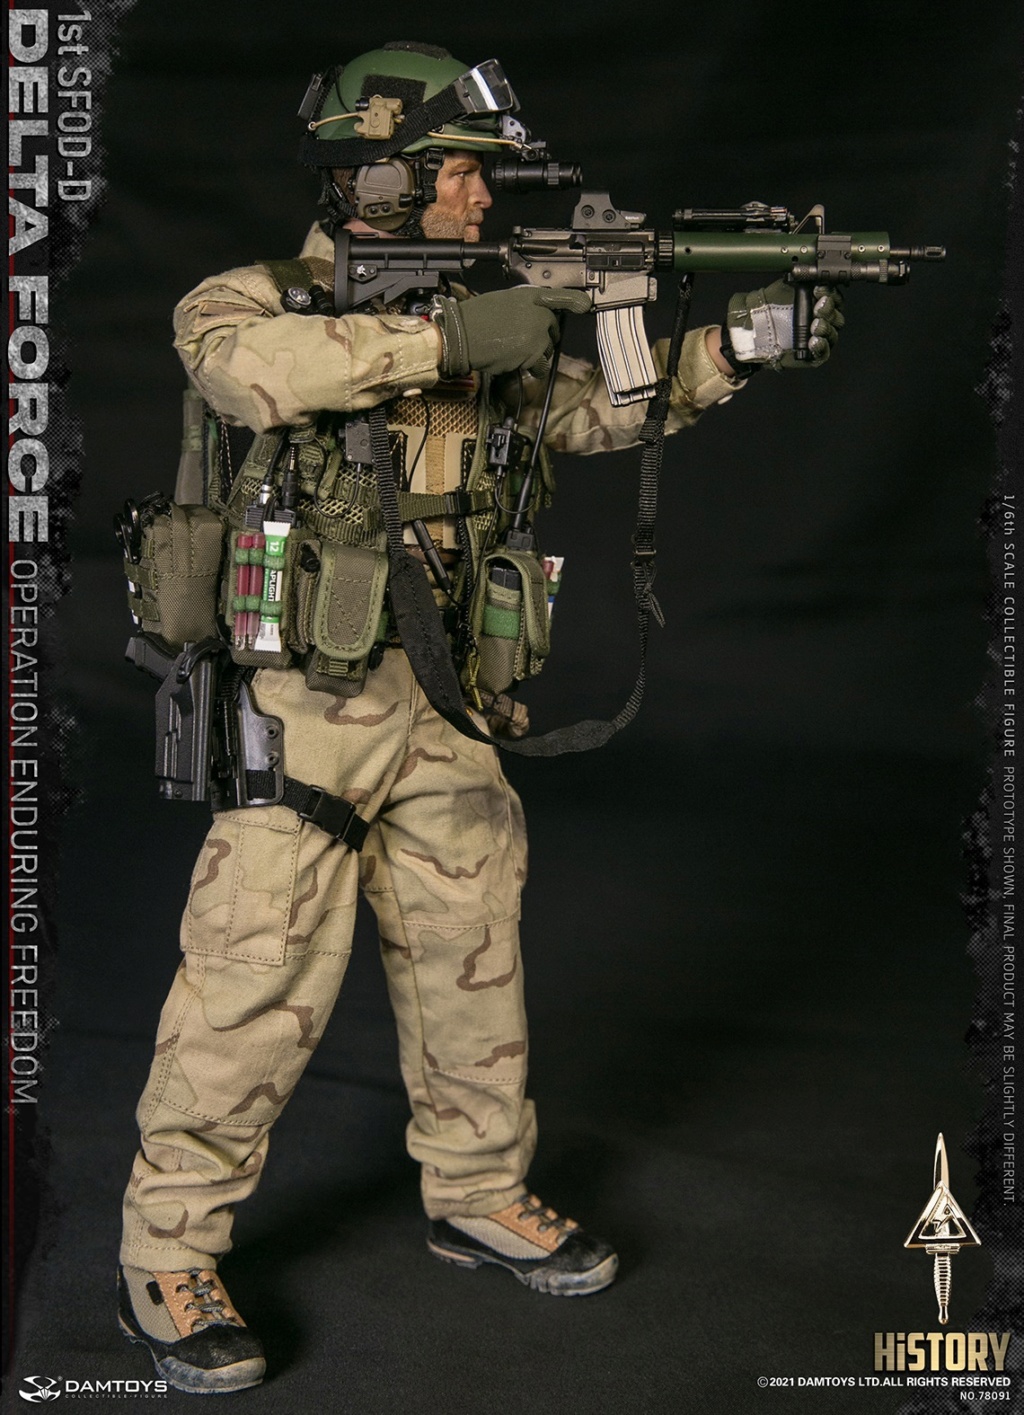 DeltaForces - NEW PRODUCT: DAMTOYS: 1/6 Delta Forces 1st SFOD-D Operation Enduring Freedom #78091 10520010